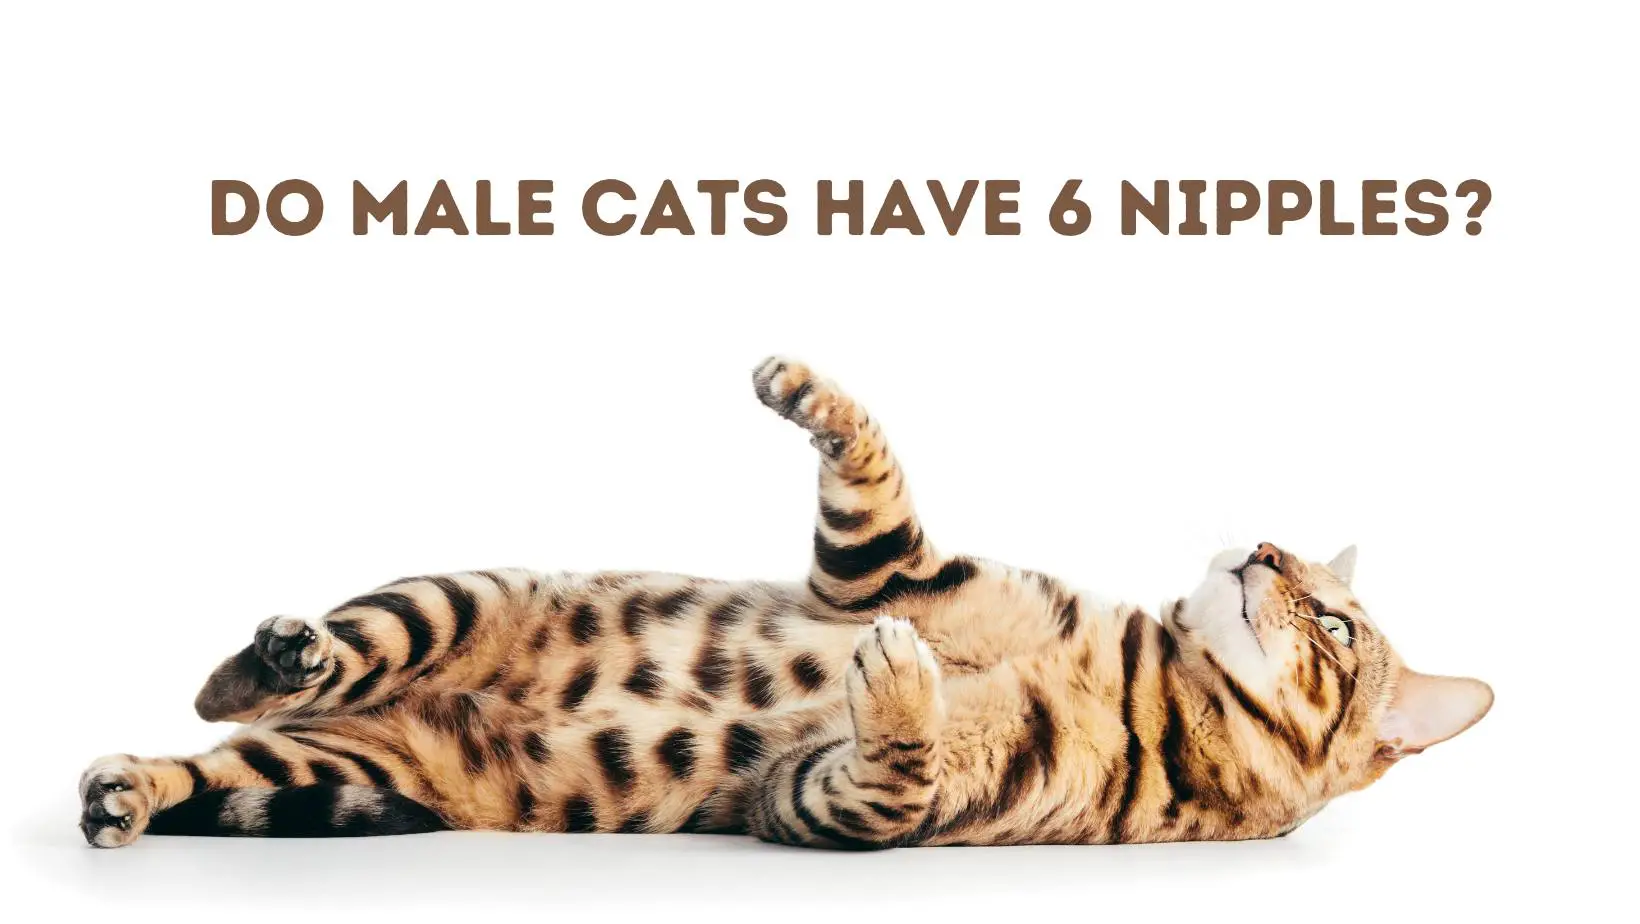 Do Male Cats Have 6 Nipples?